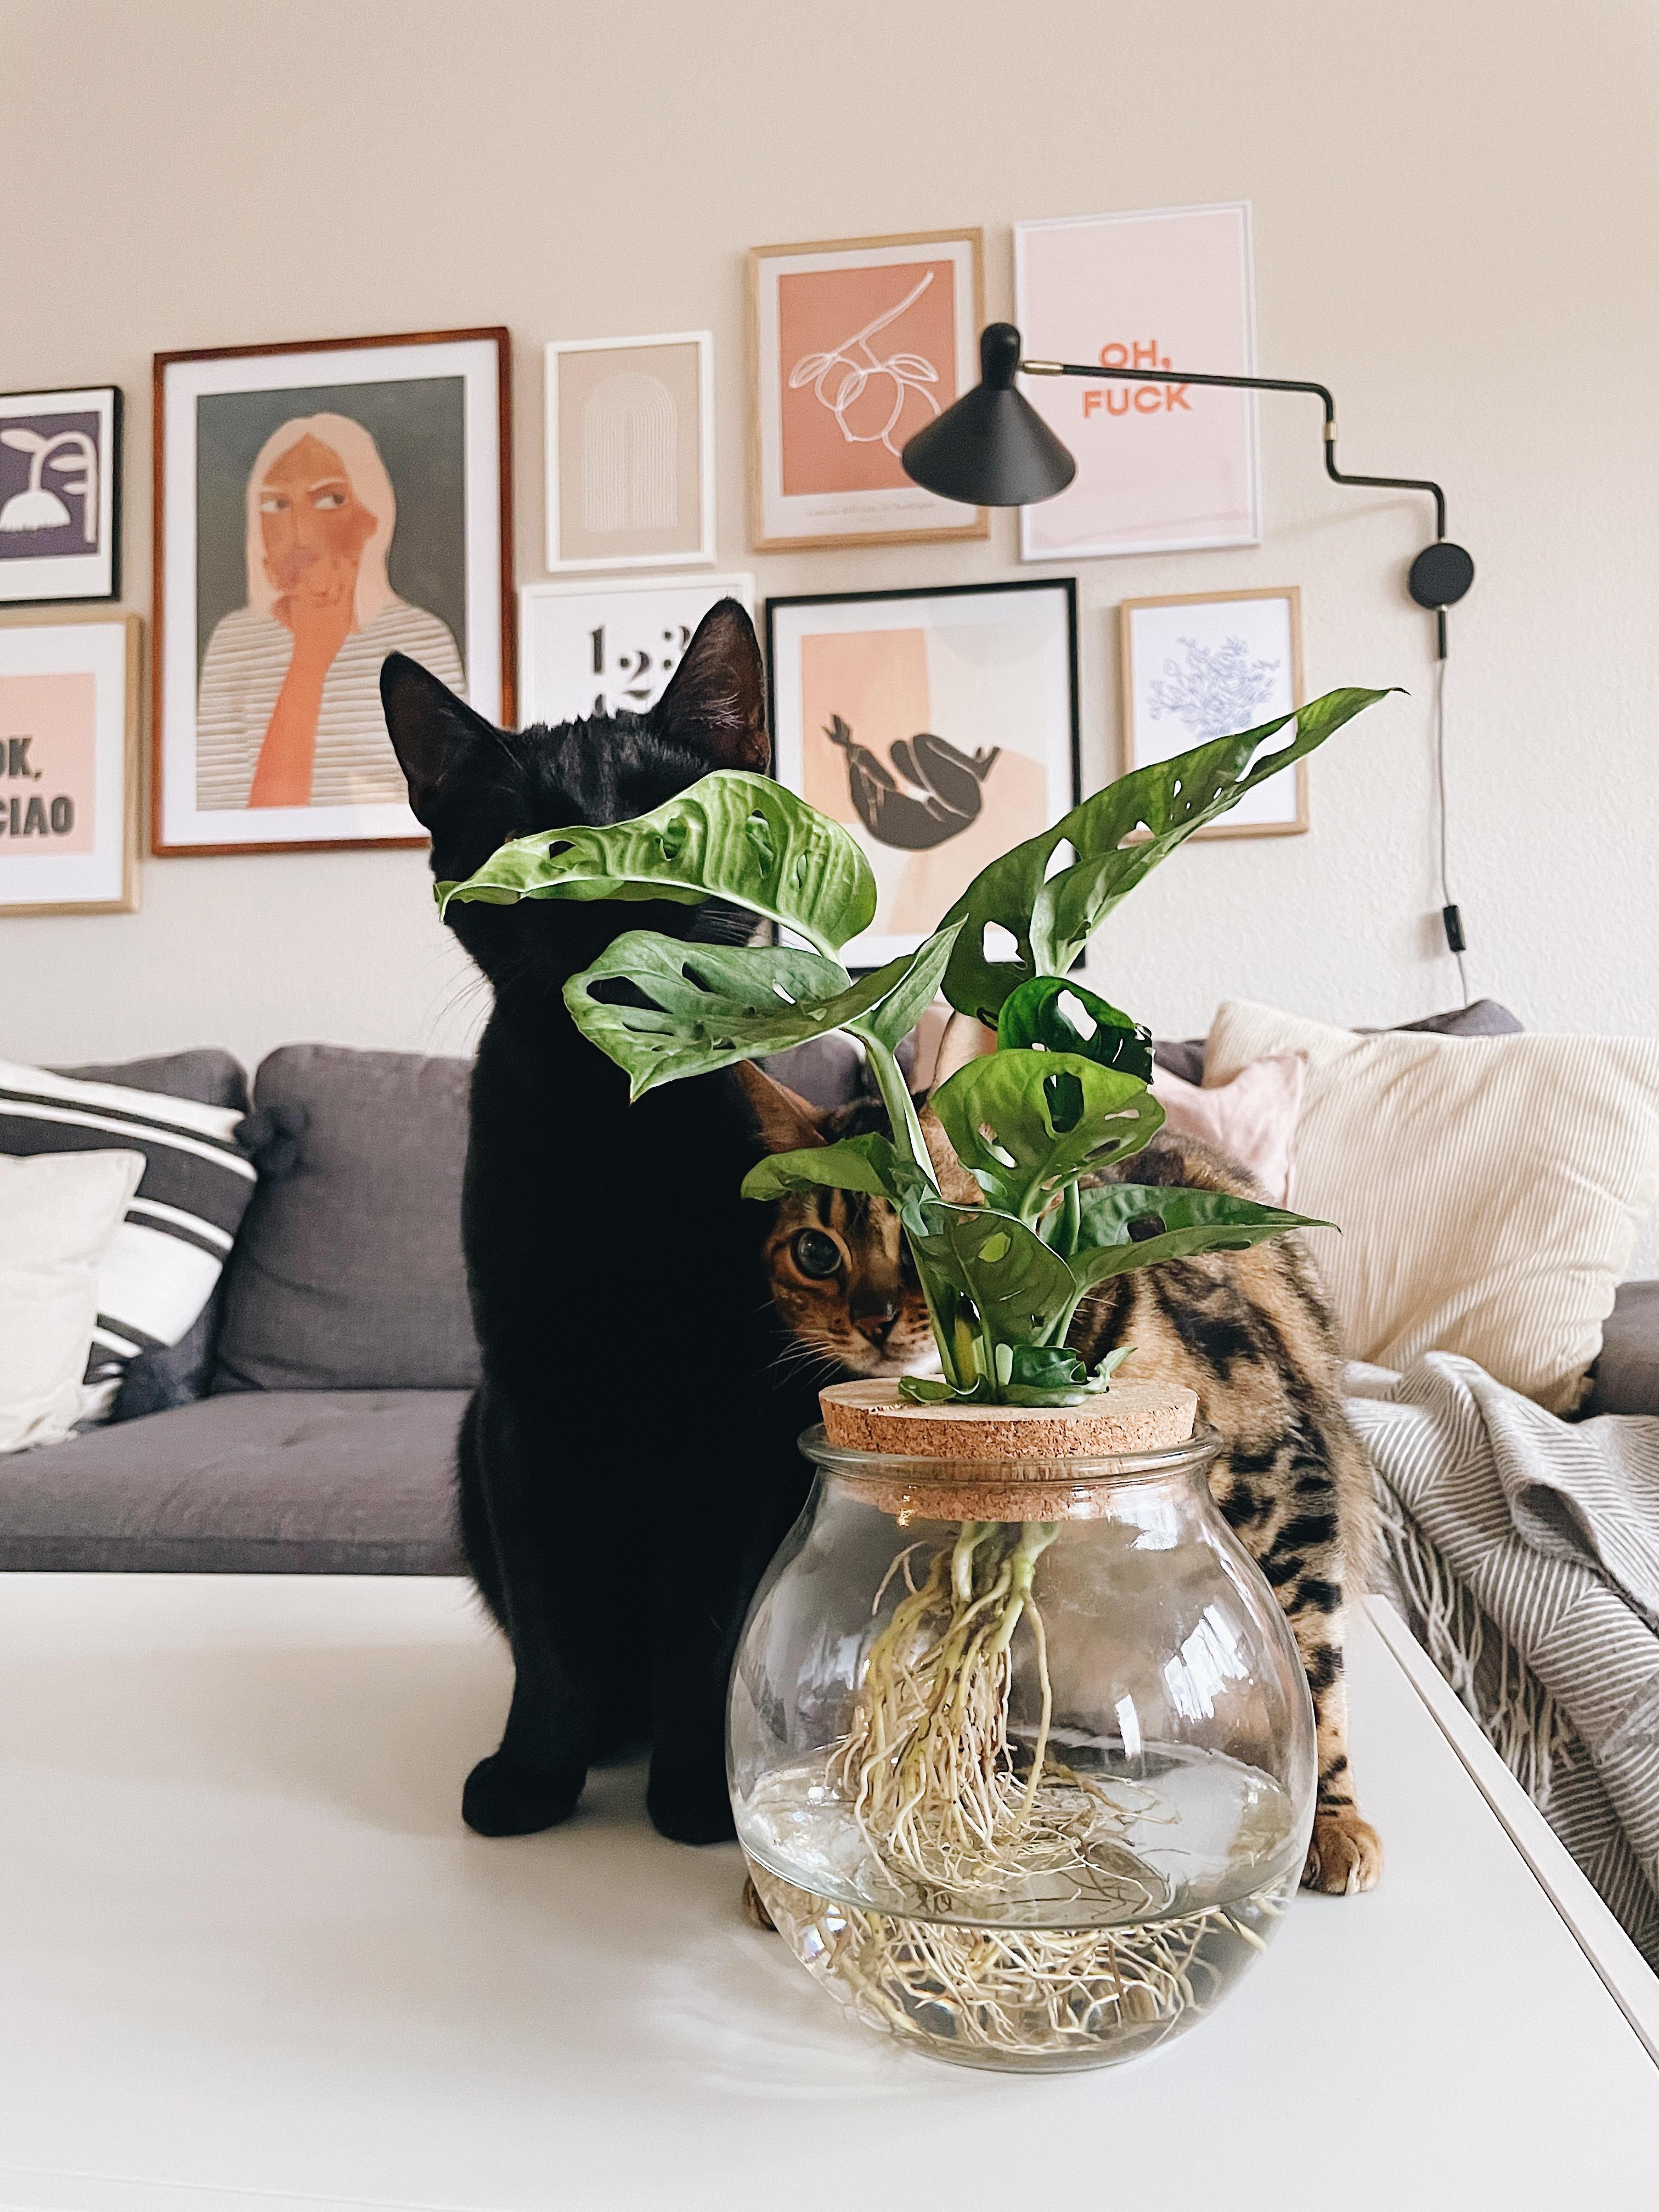 Double Trouble ❤️ #catmom #plants #wohnzimmer #gallerywall #hygge #couchliebt 